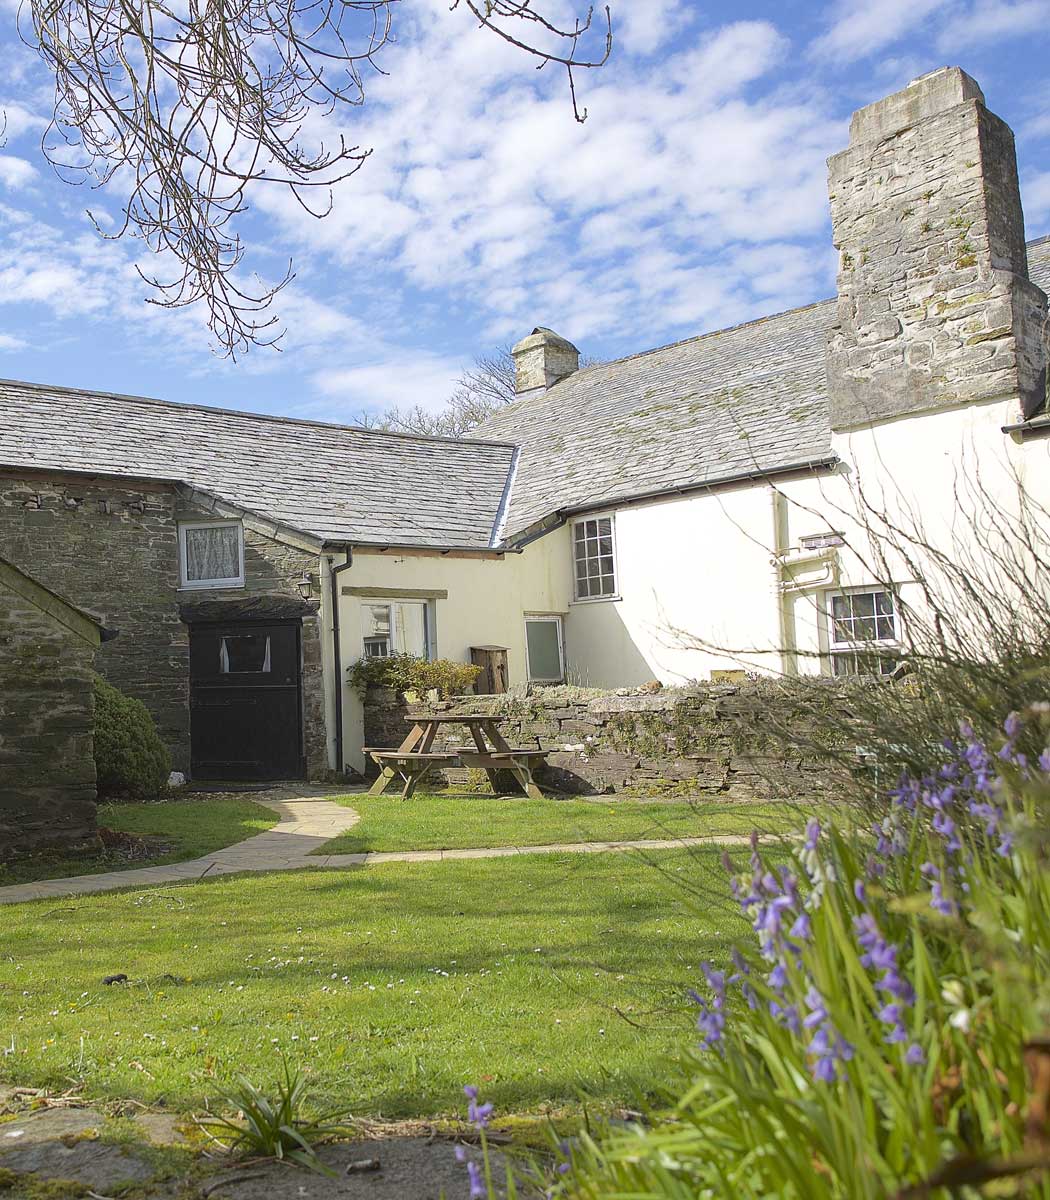 Forge Cottage | 3 Bedrooms | Sleeps 7 |  From £190 per night | Pets